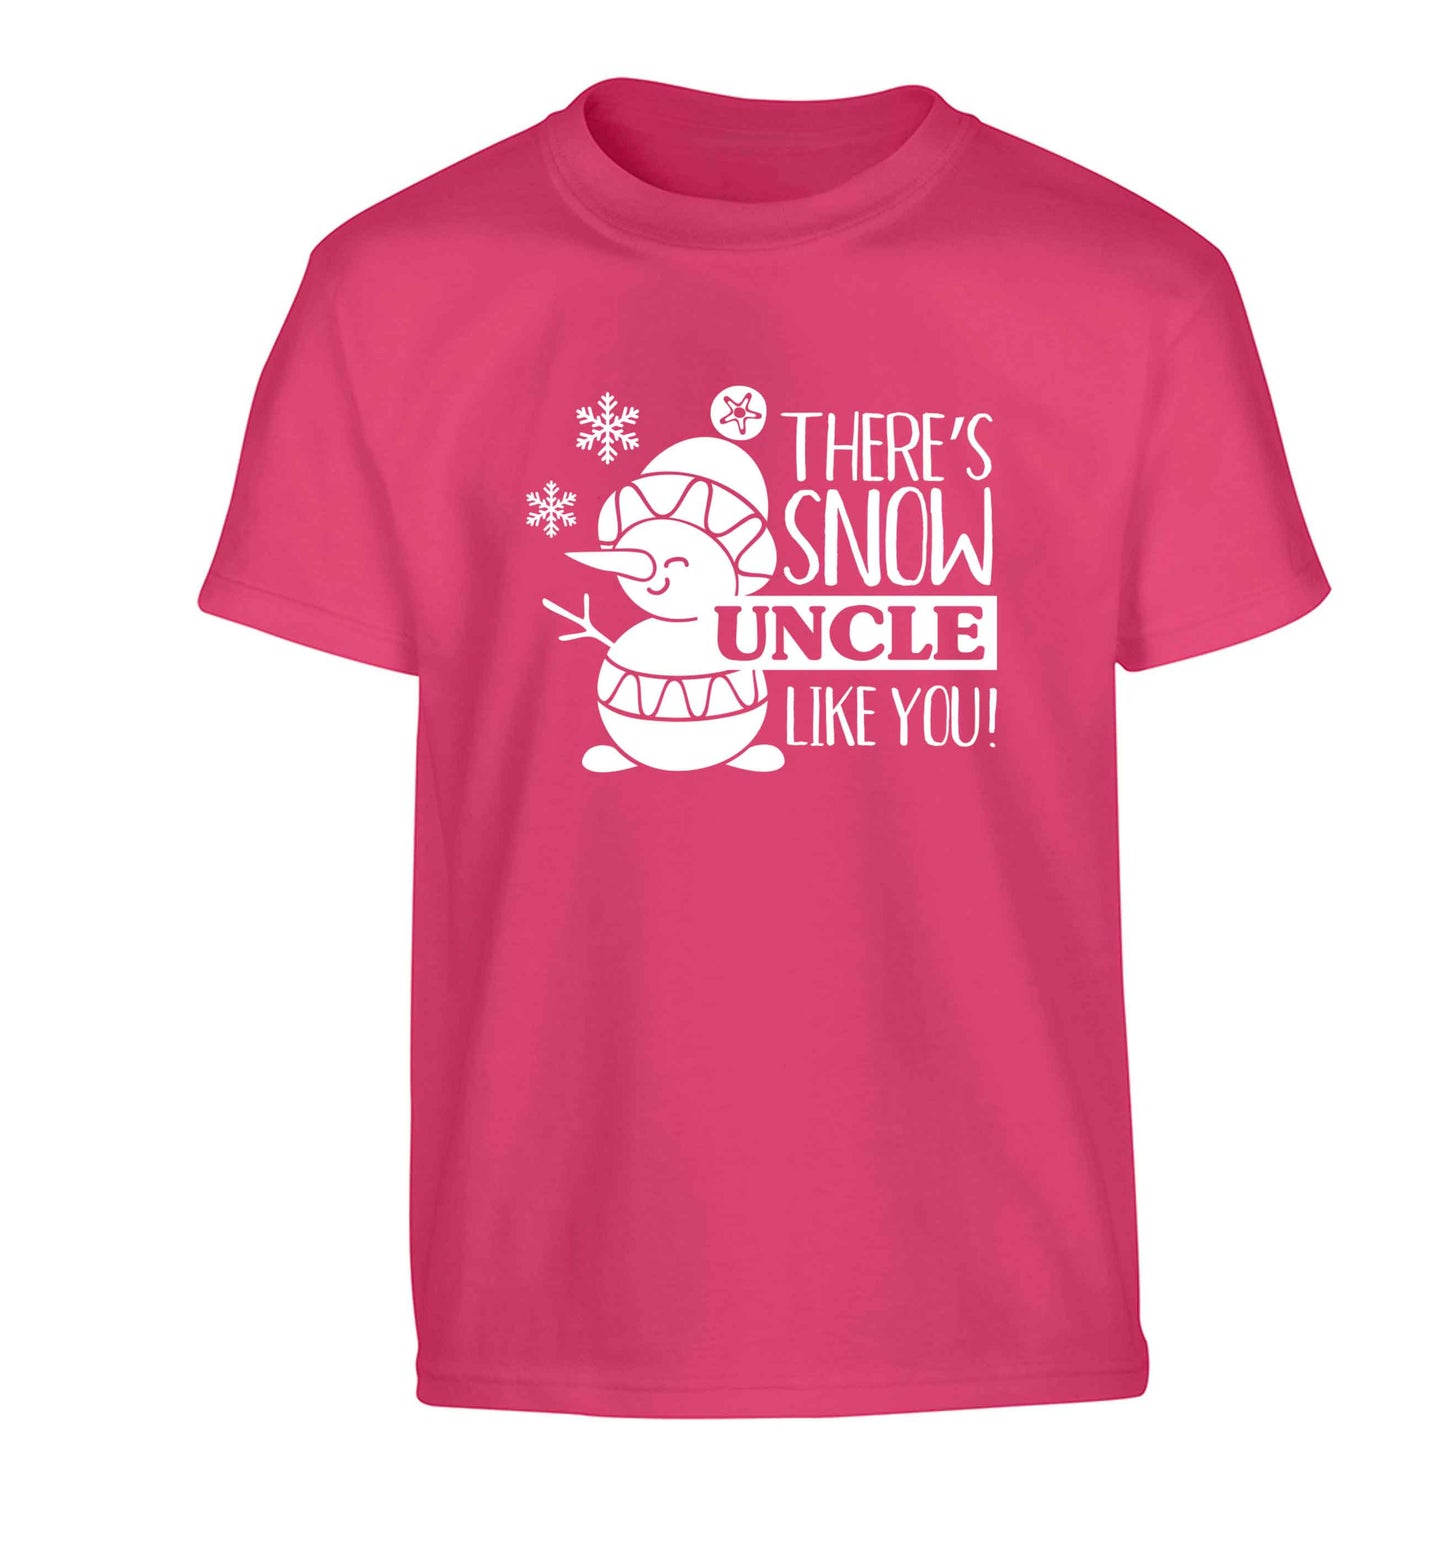 There's snow uncle like you Children's pink Tshirt 12-13 Years